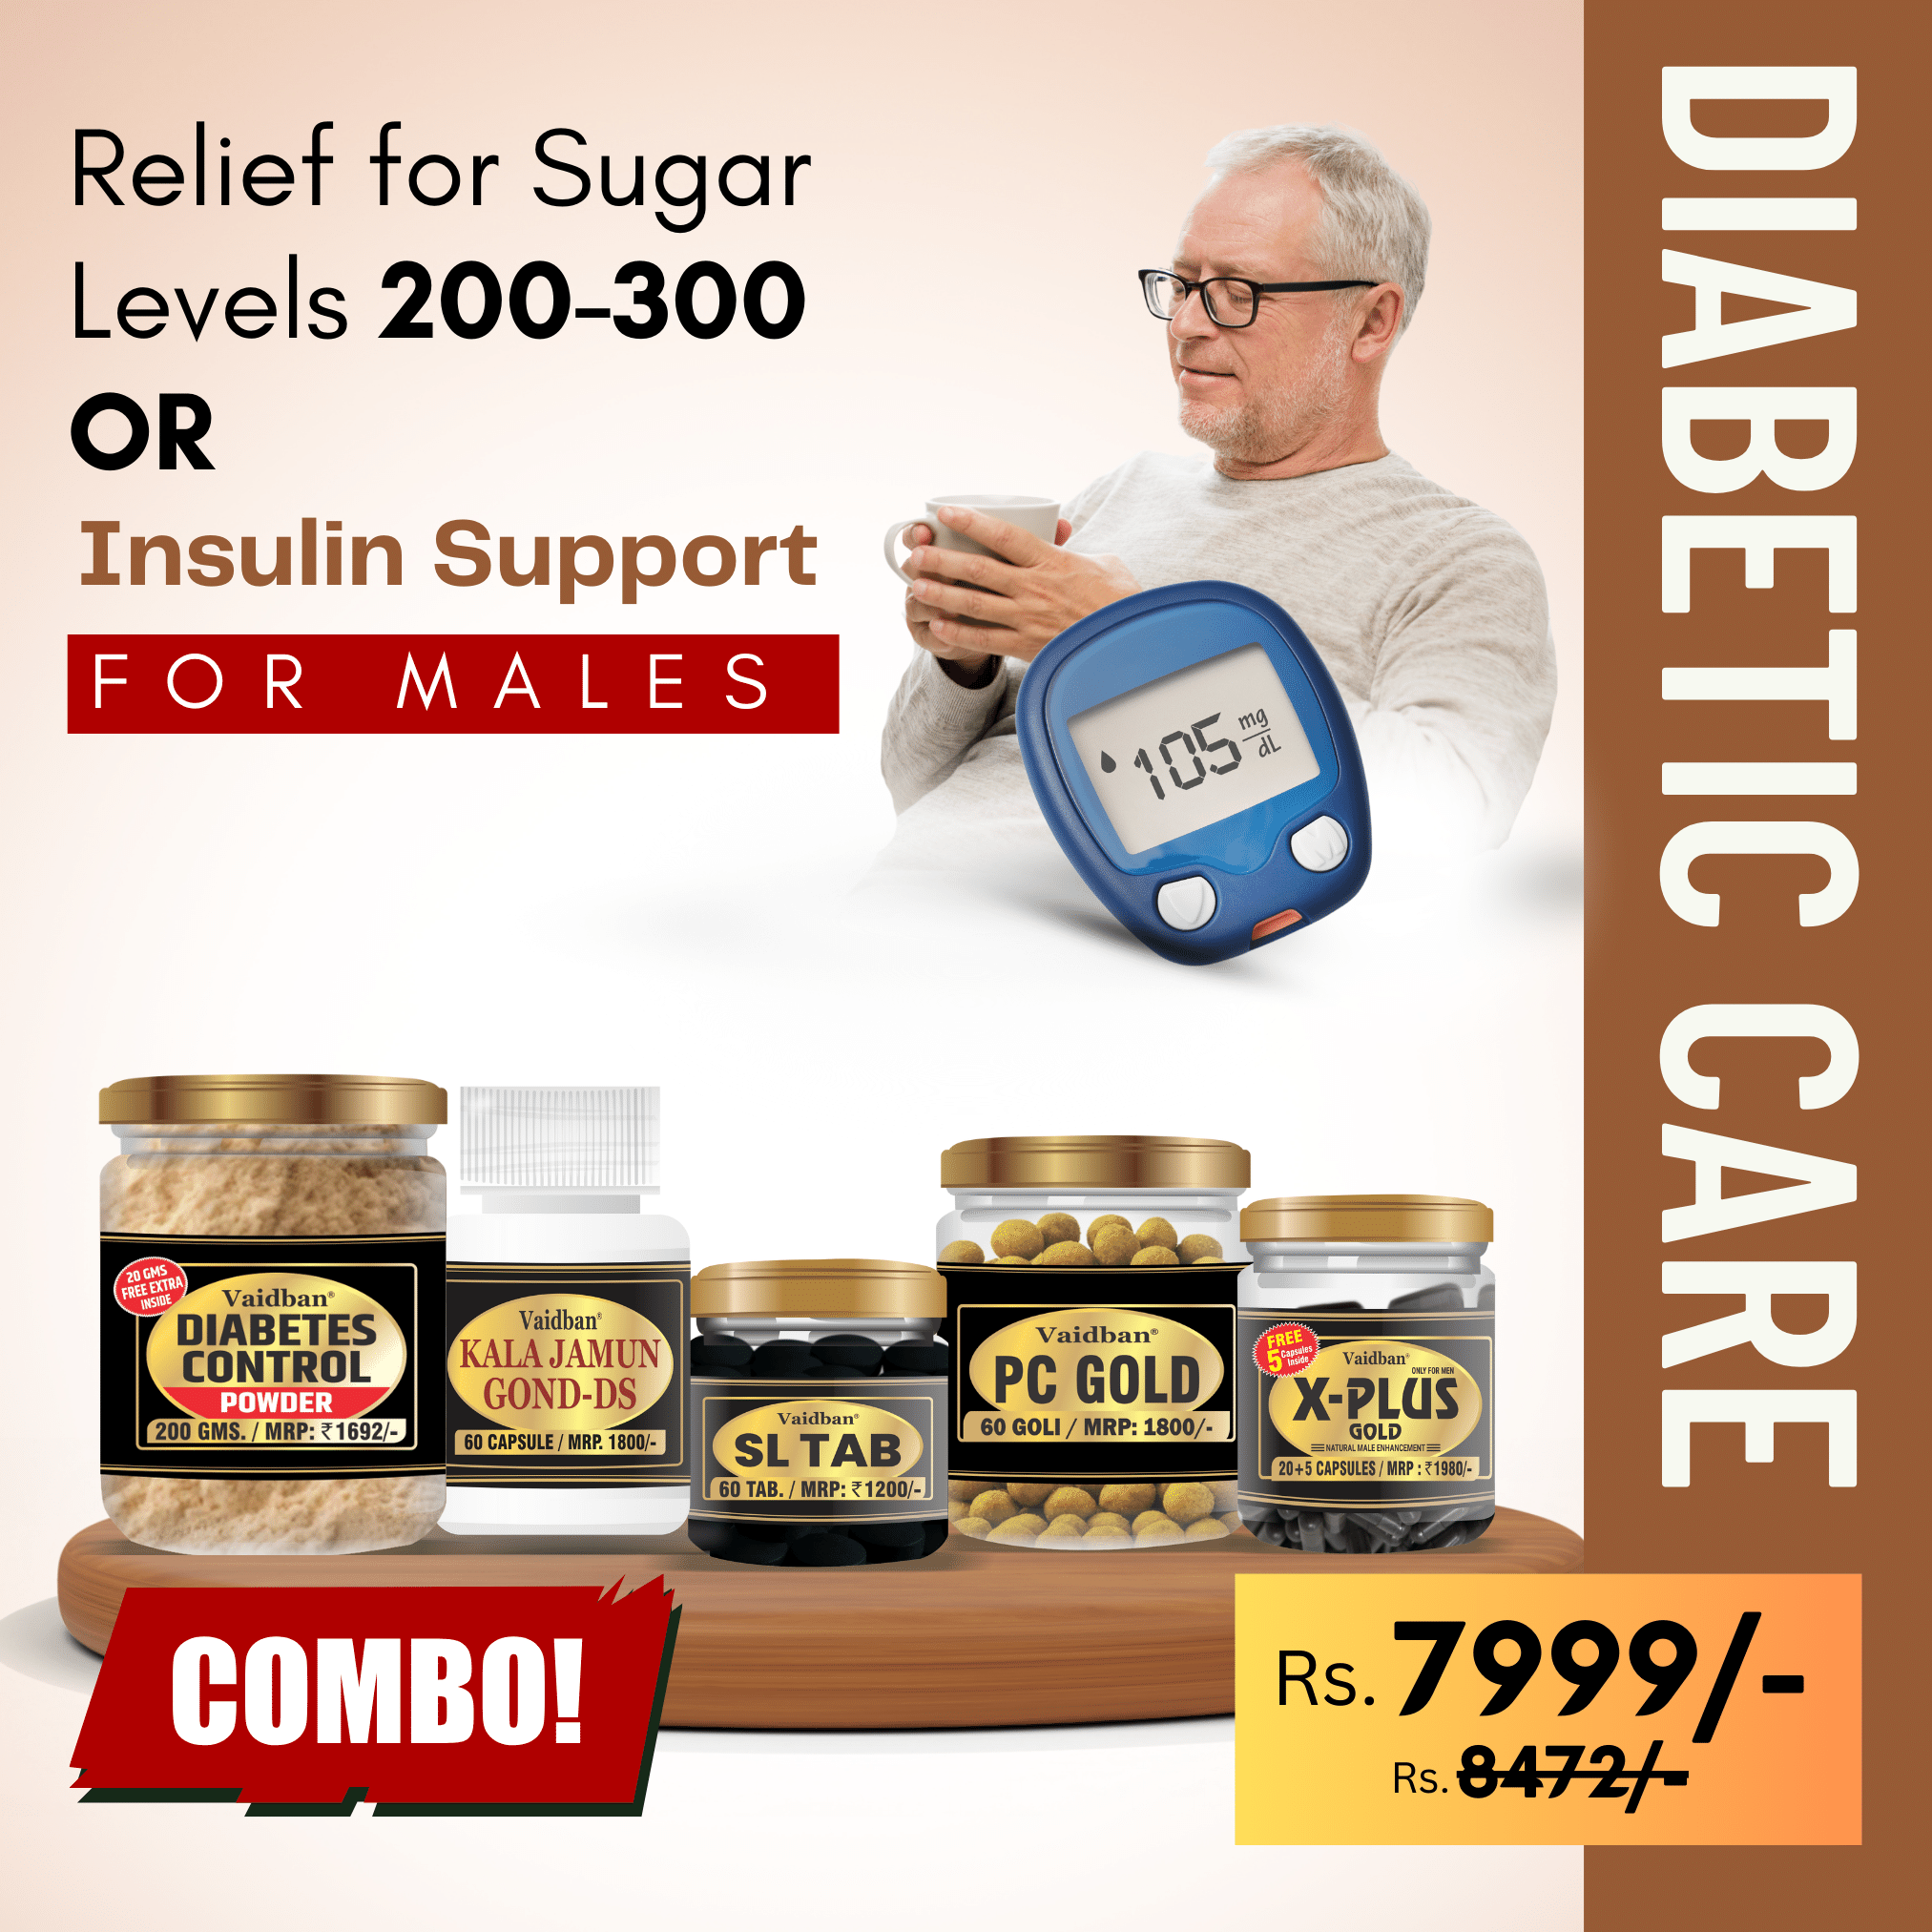 Vaidban Diabetic Care Combo for Men: Comprehensive Blood Sugar and Insulin Support